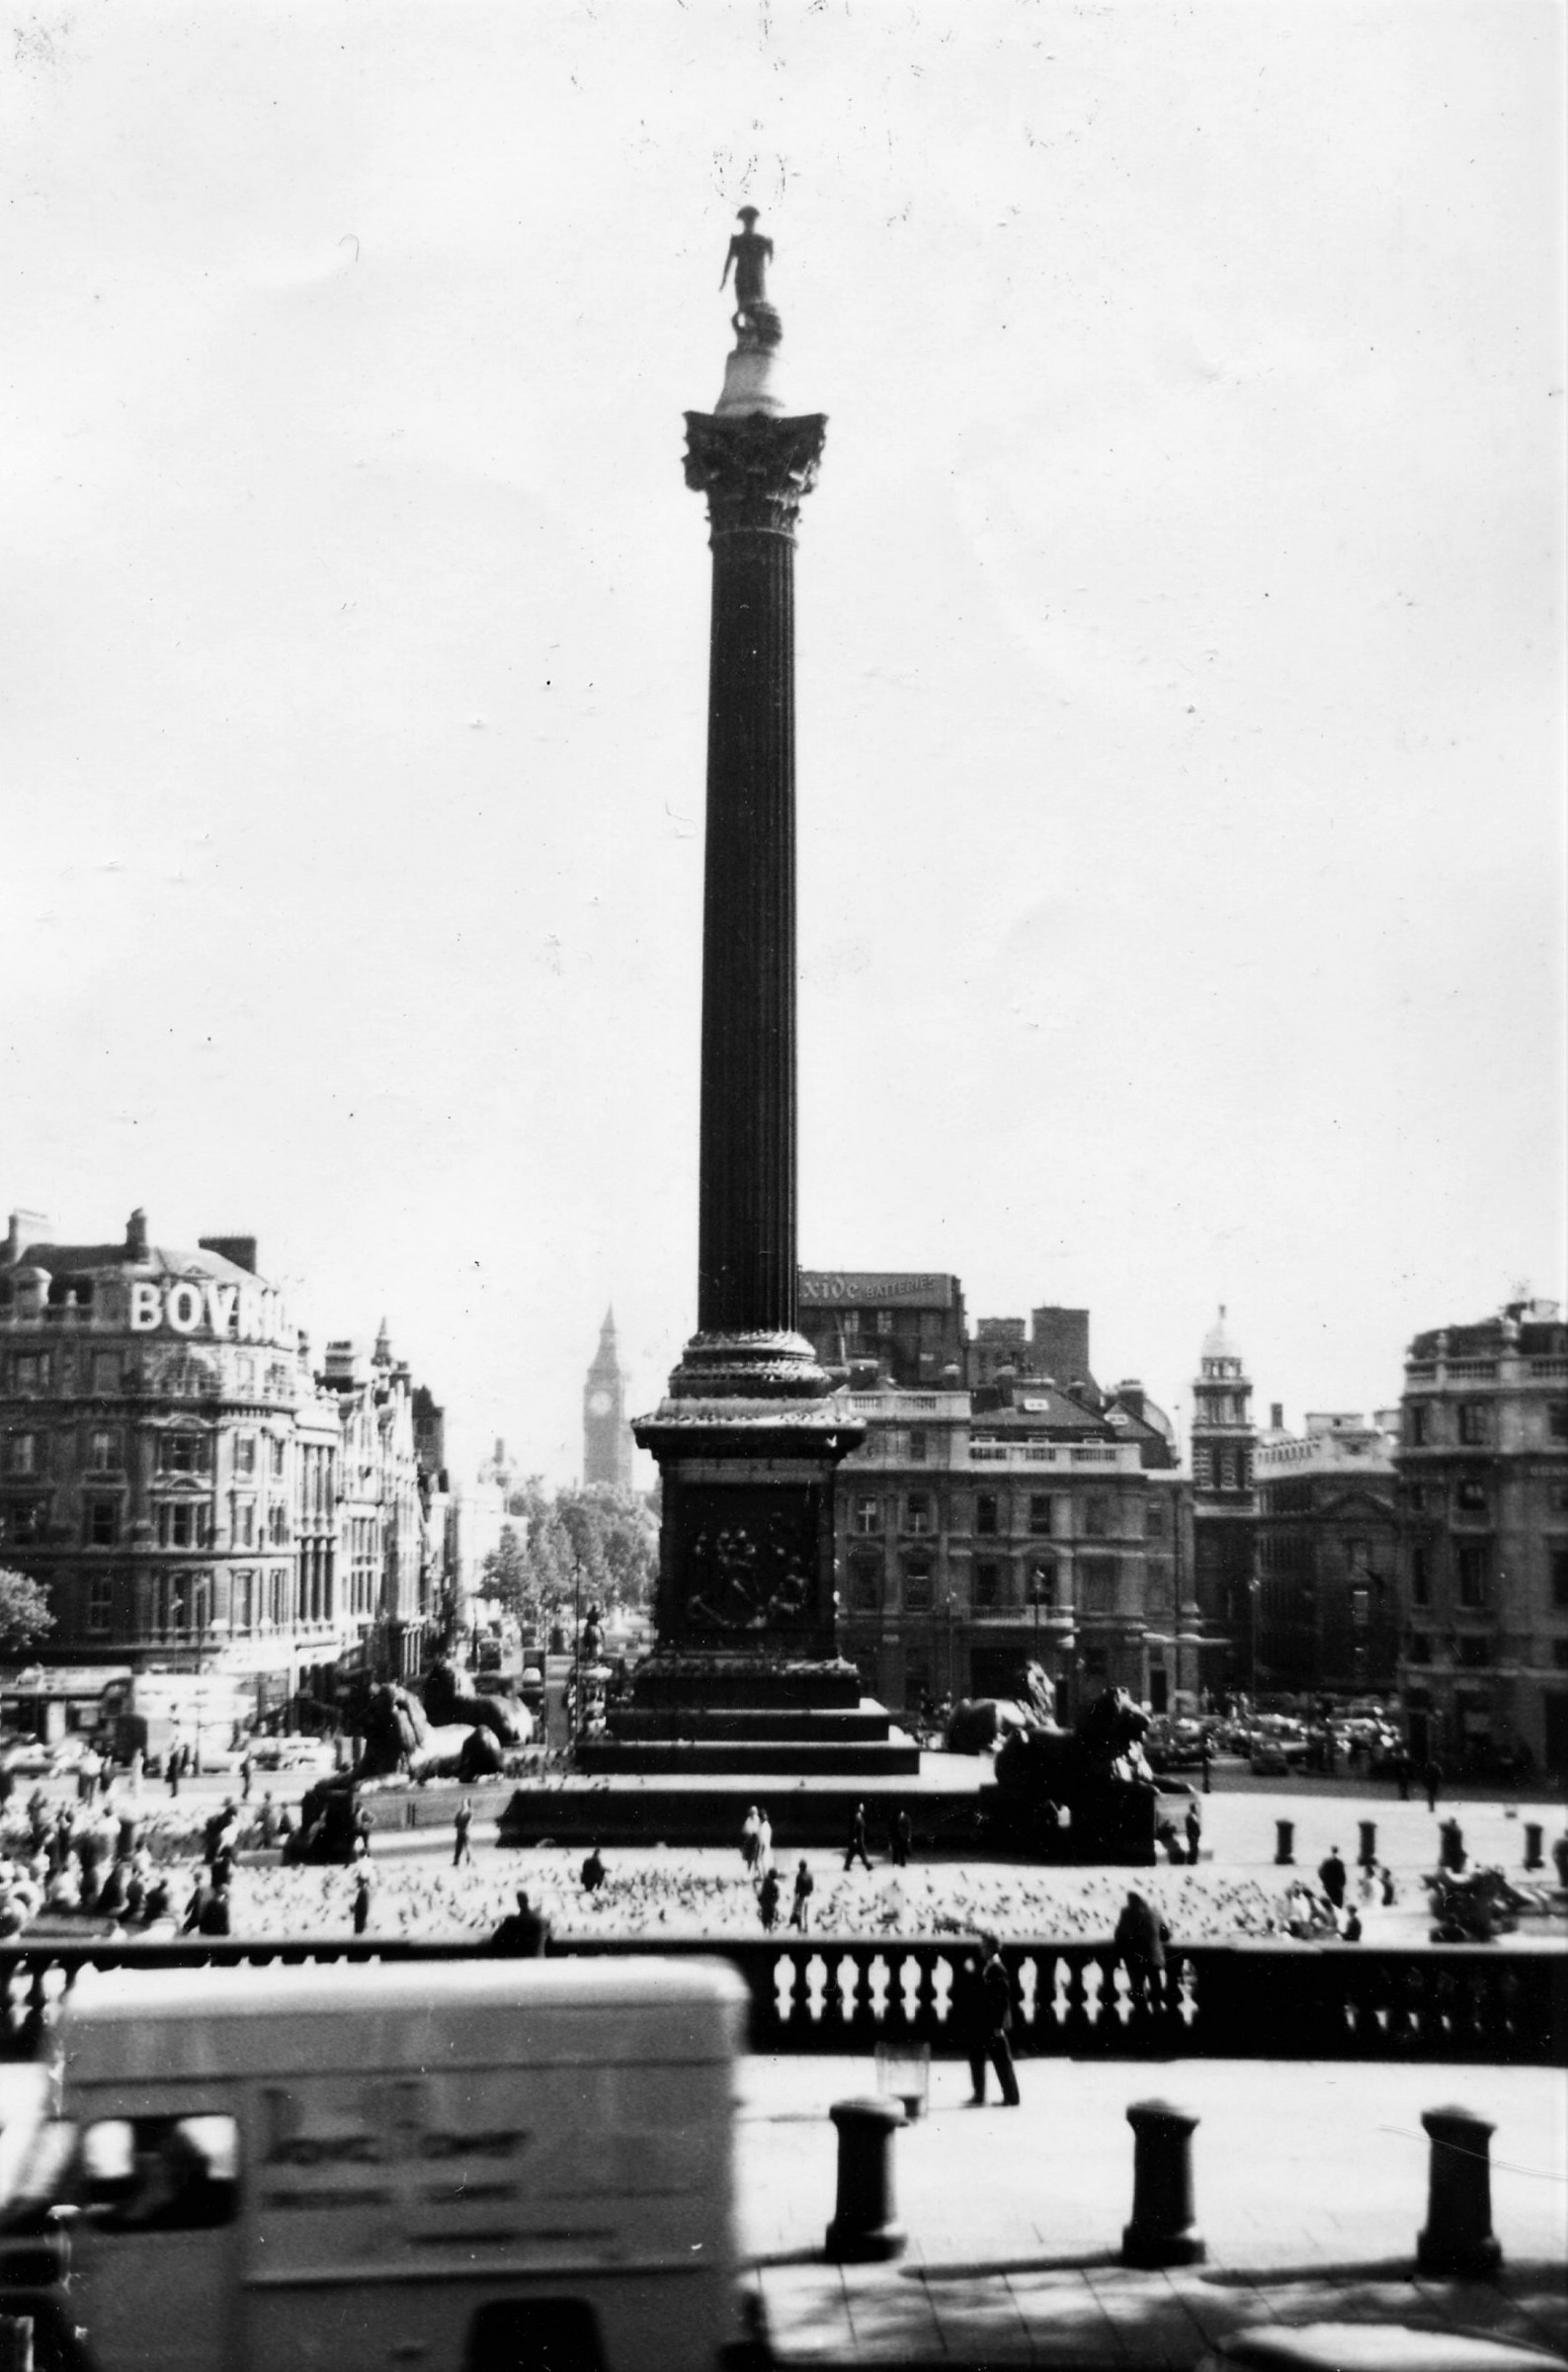 Trafalgar Square, with Big Ben in the background | Photo